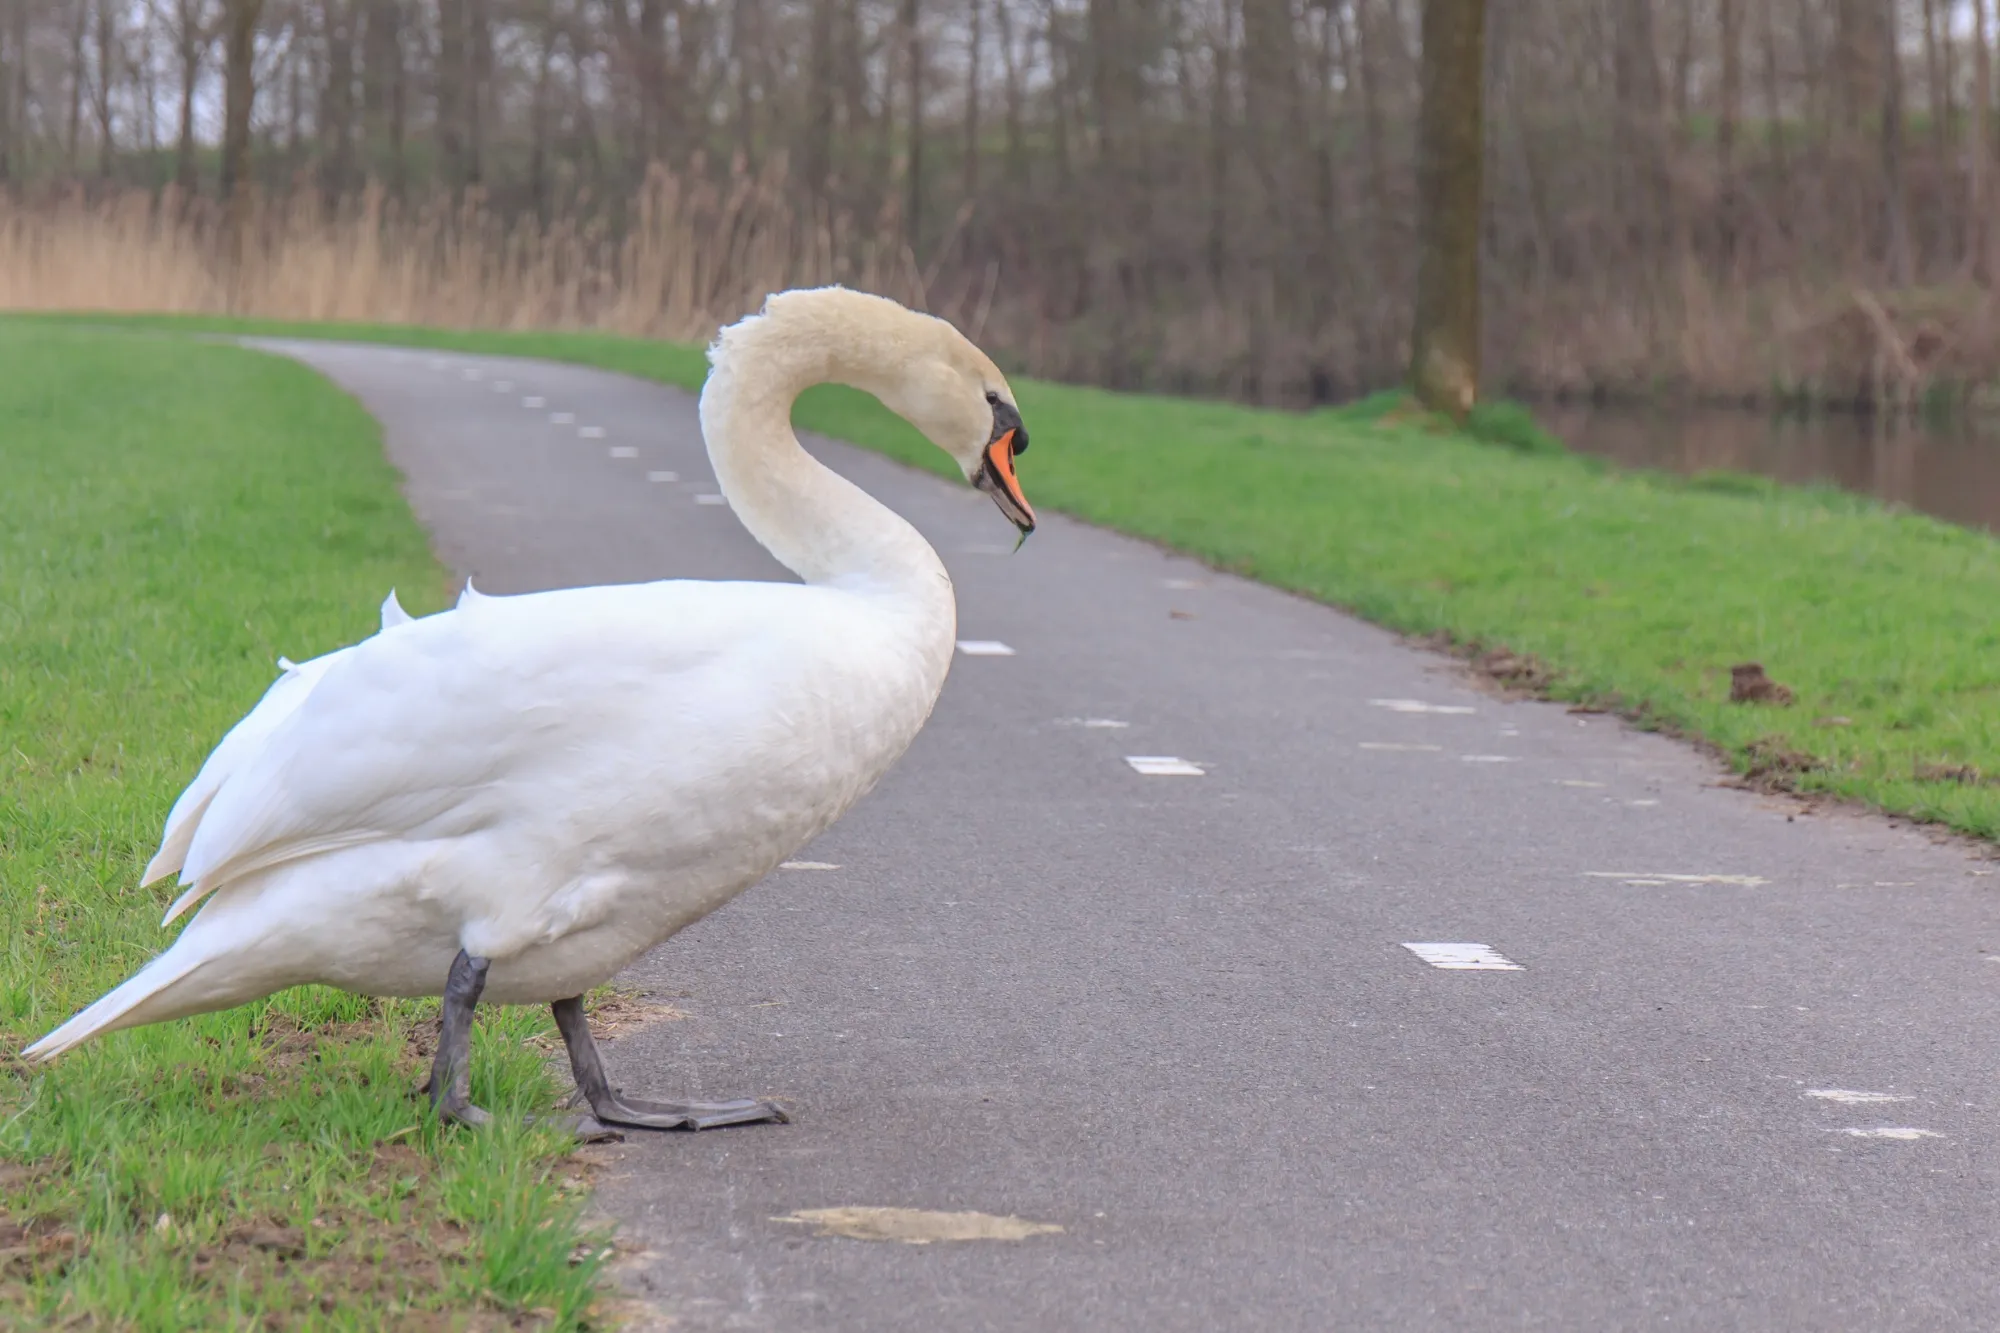 Swan crossing a road surrounded by trees